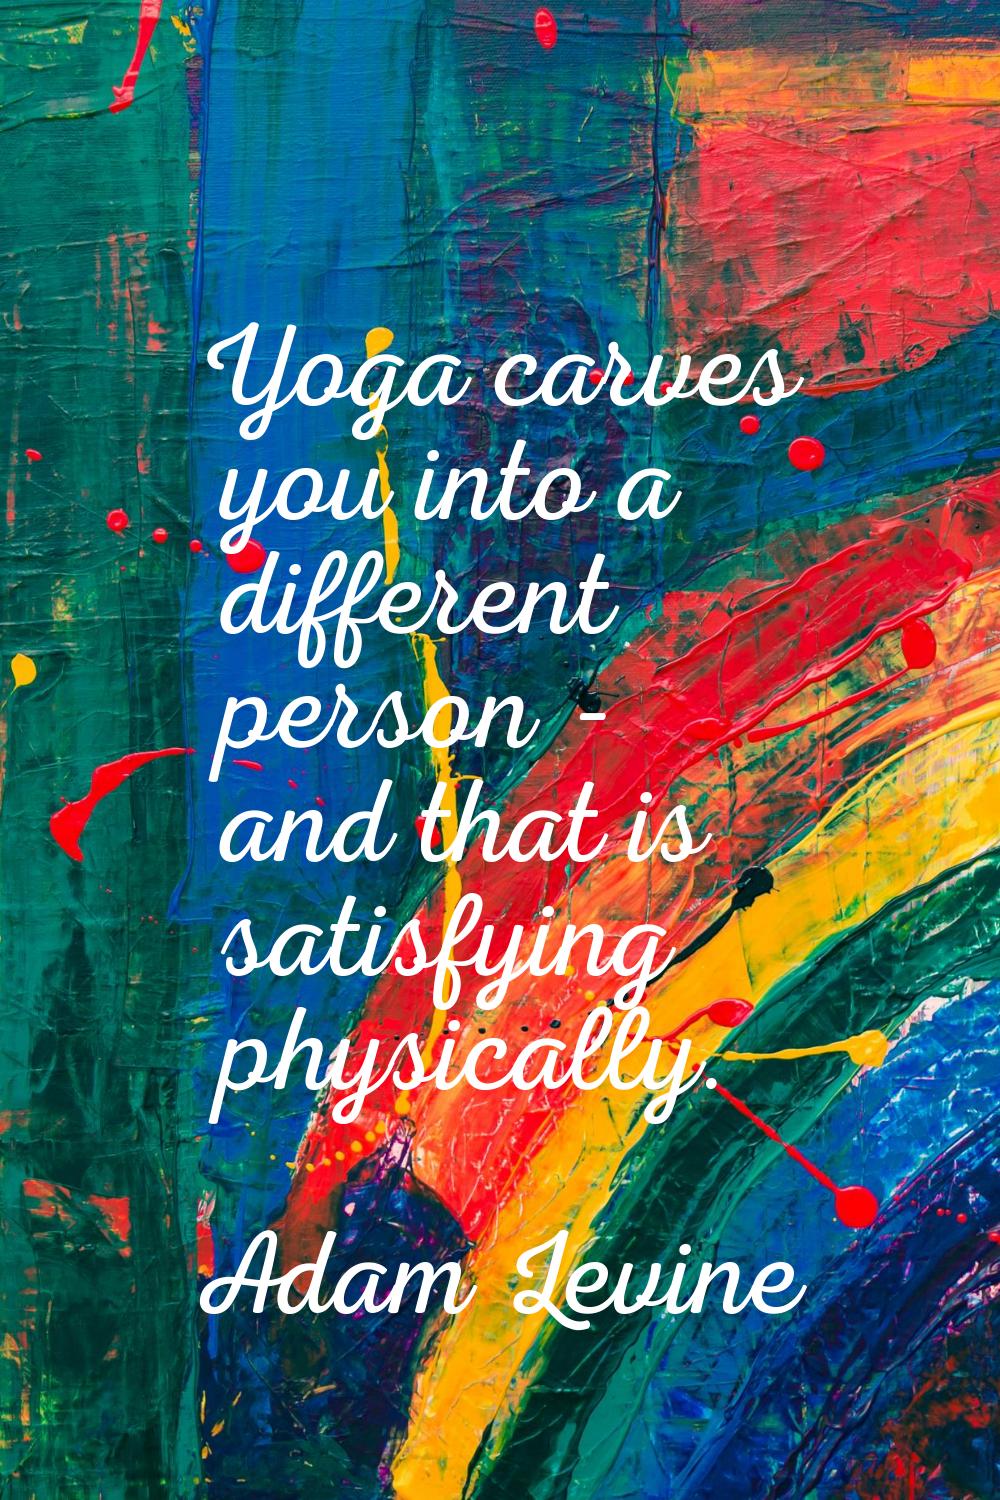 Yoga carves you into a different person - and that is satisfying physically.